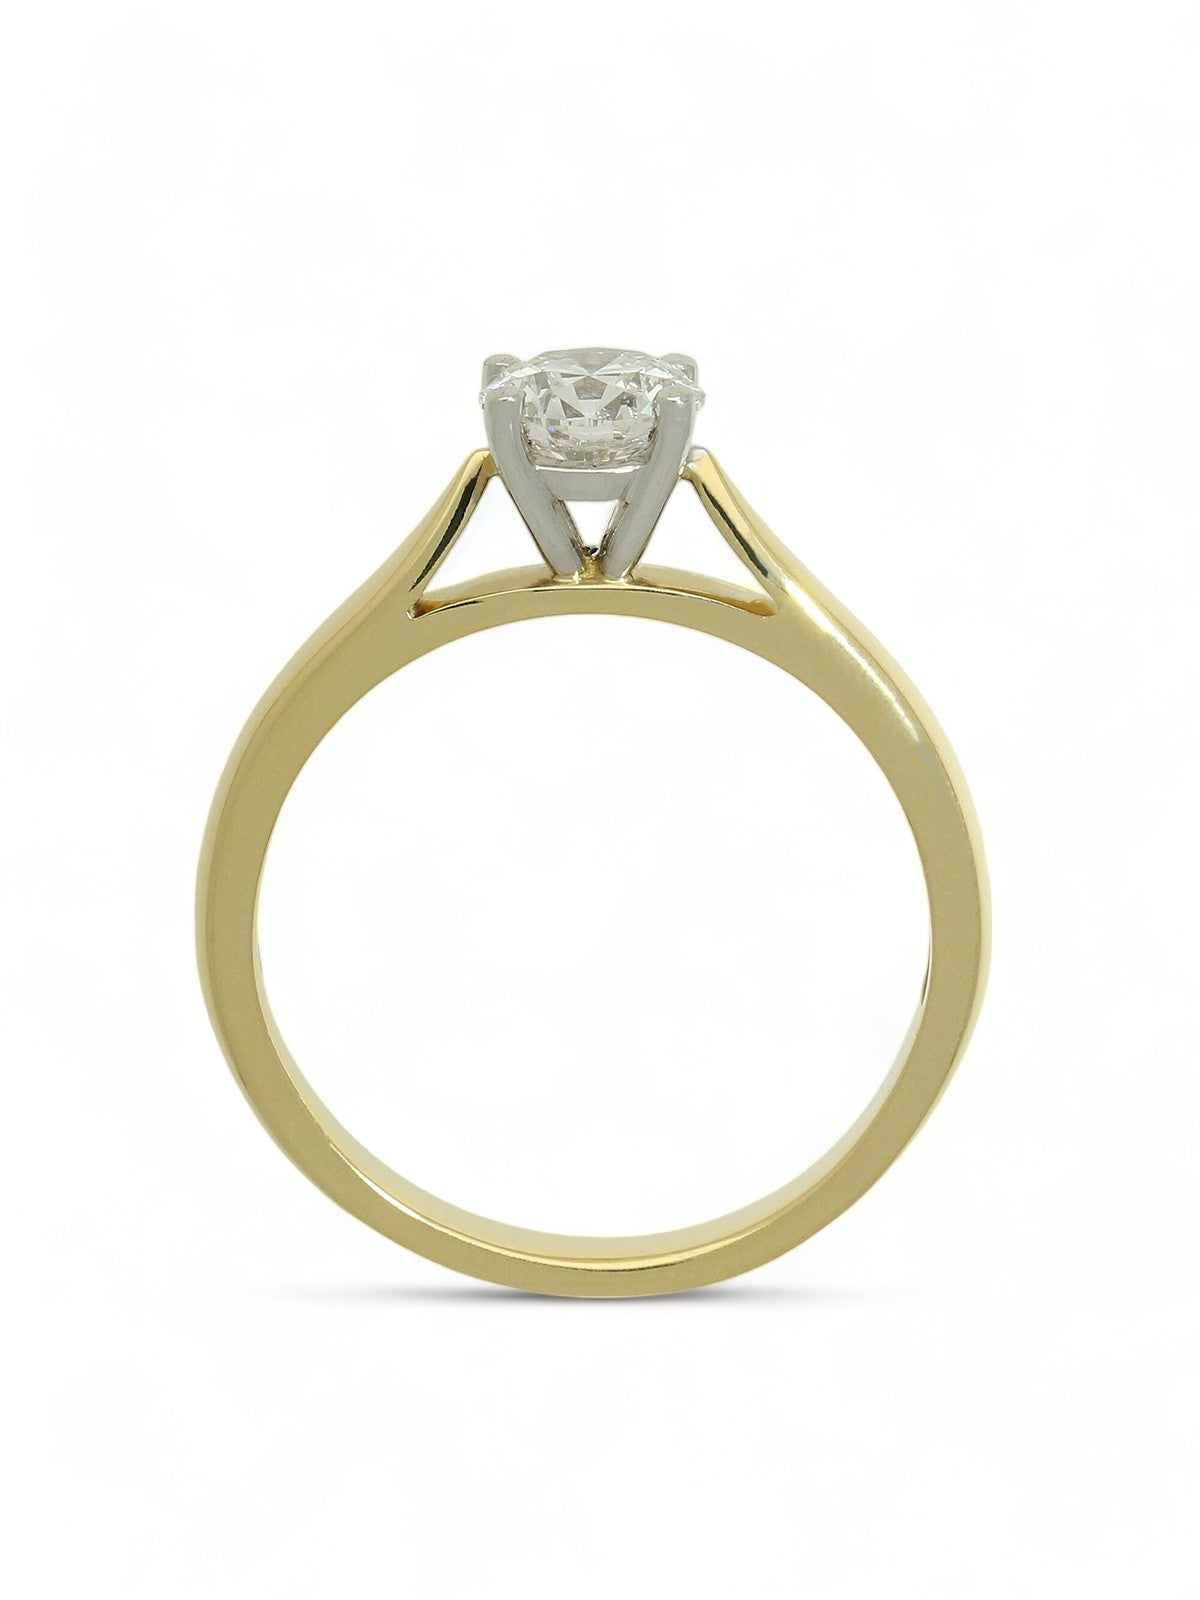 Diamond Solitaire Engagement Ring 'The Catherine Collection' 0.70ct Round Brilliant Cut in Yellow & White Gold